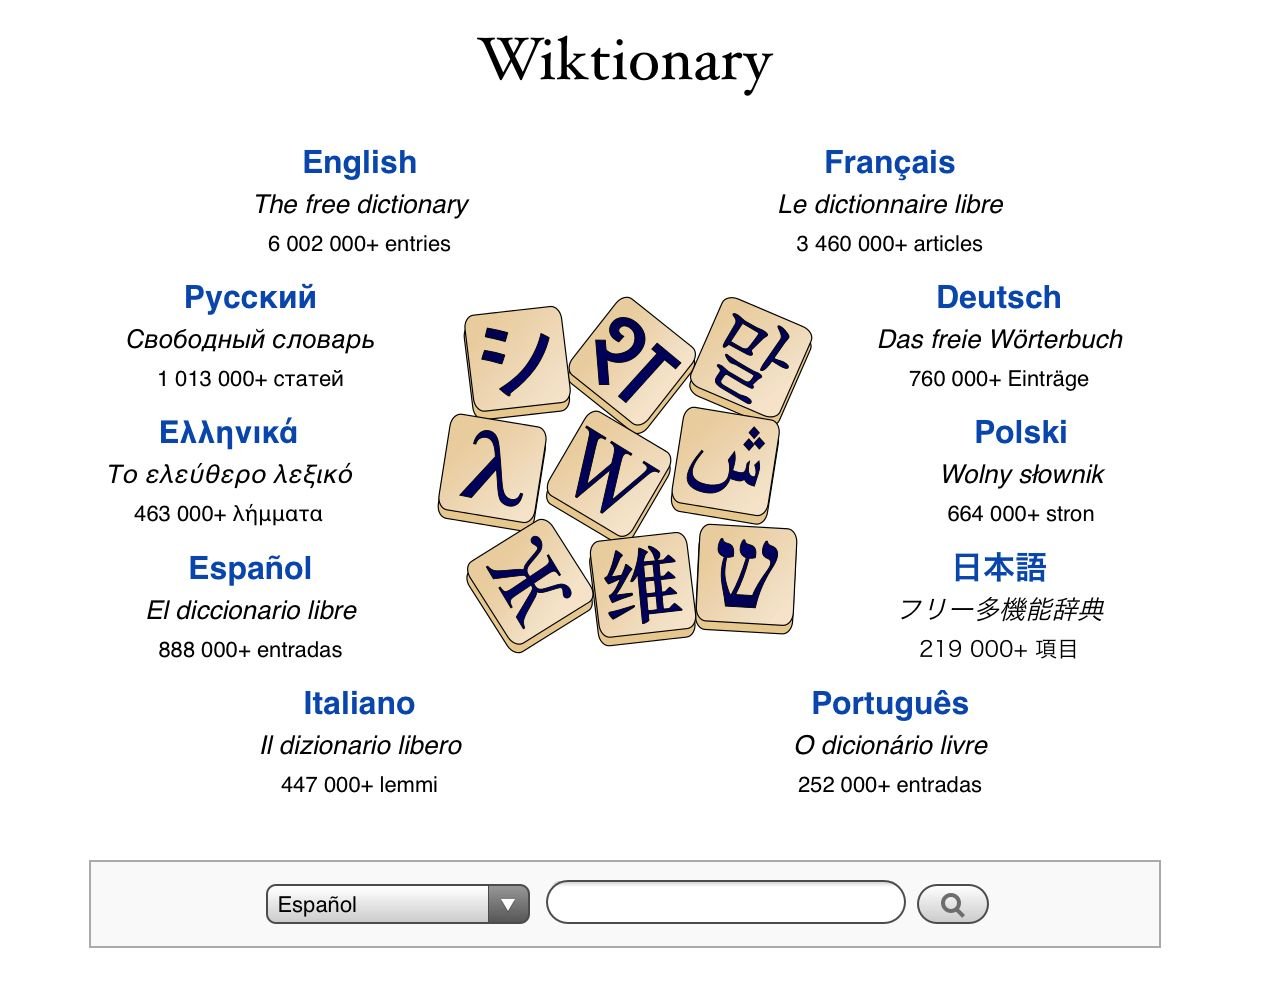 stream - Wiktionary, the free dictionary